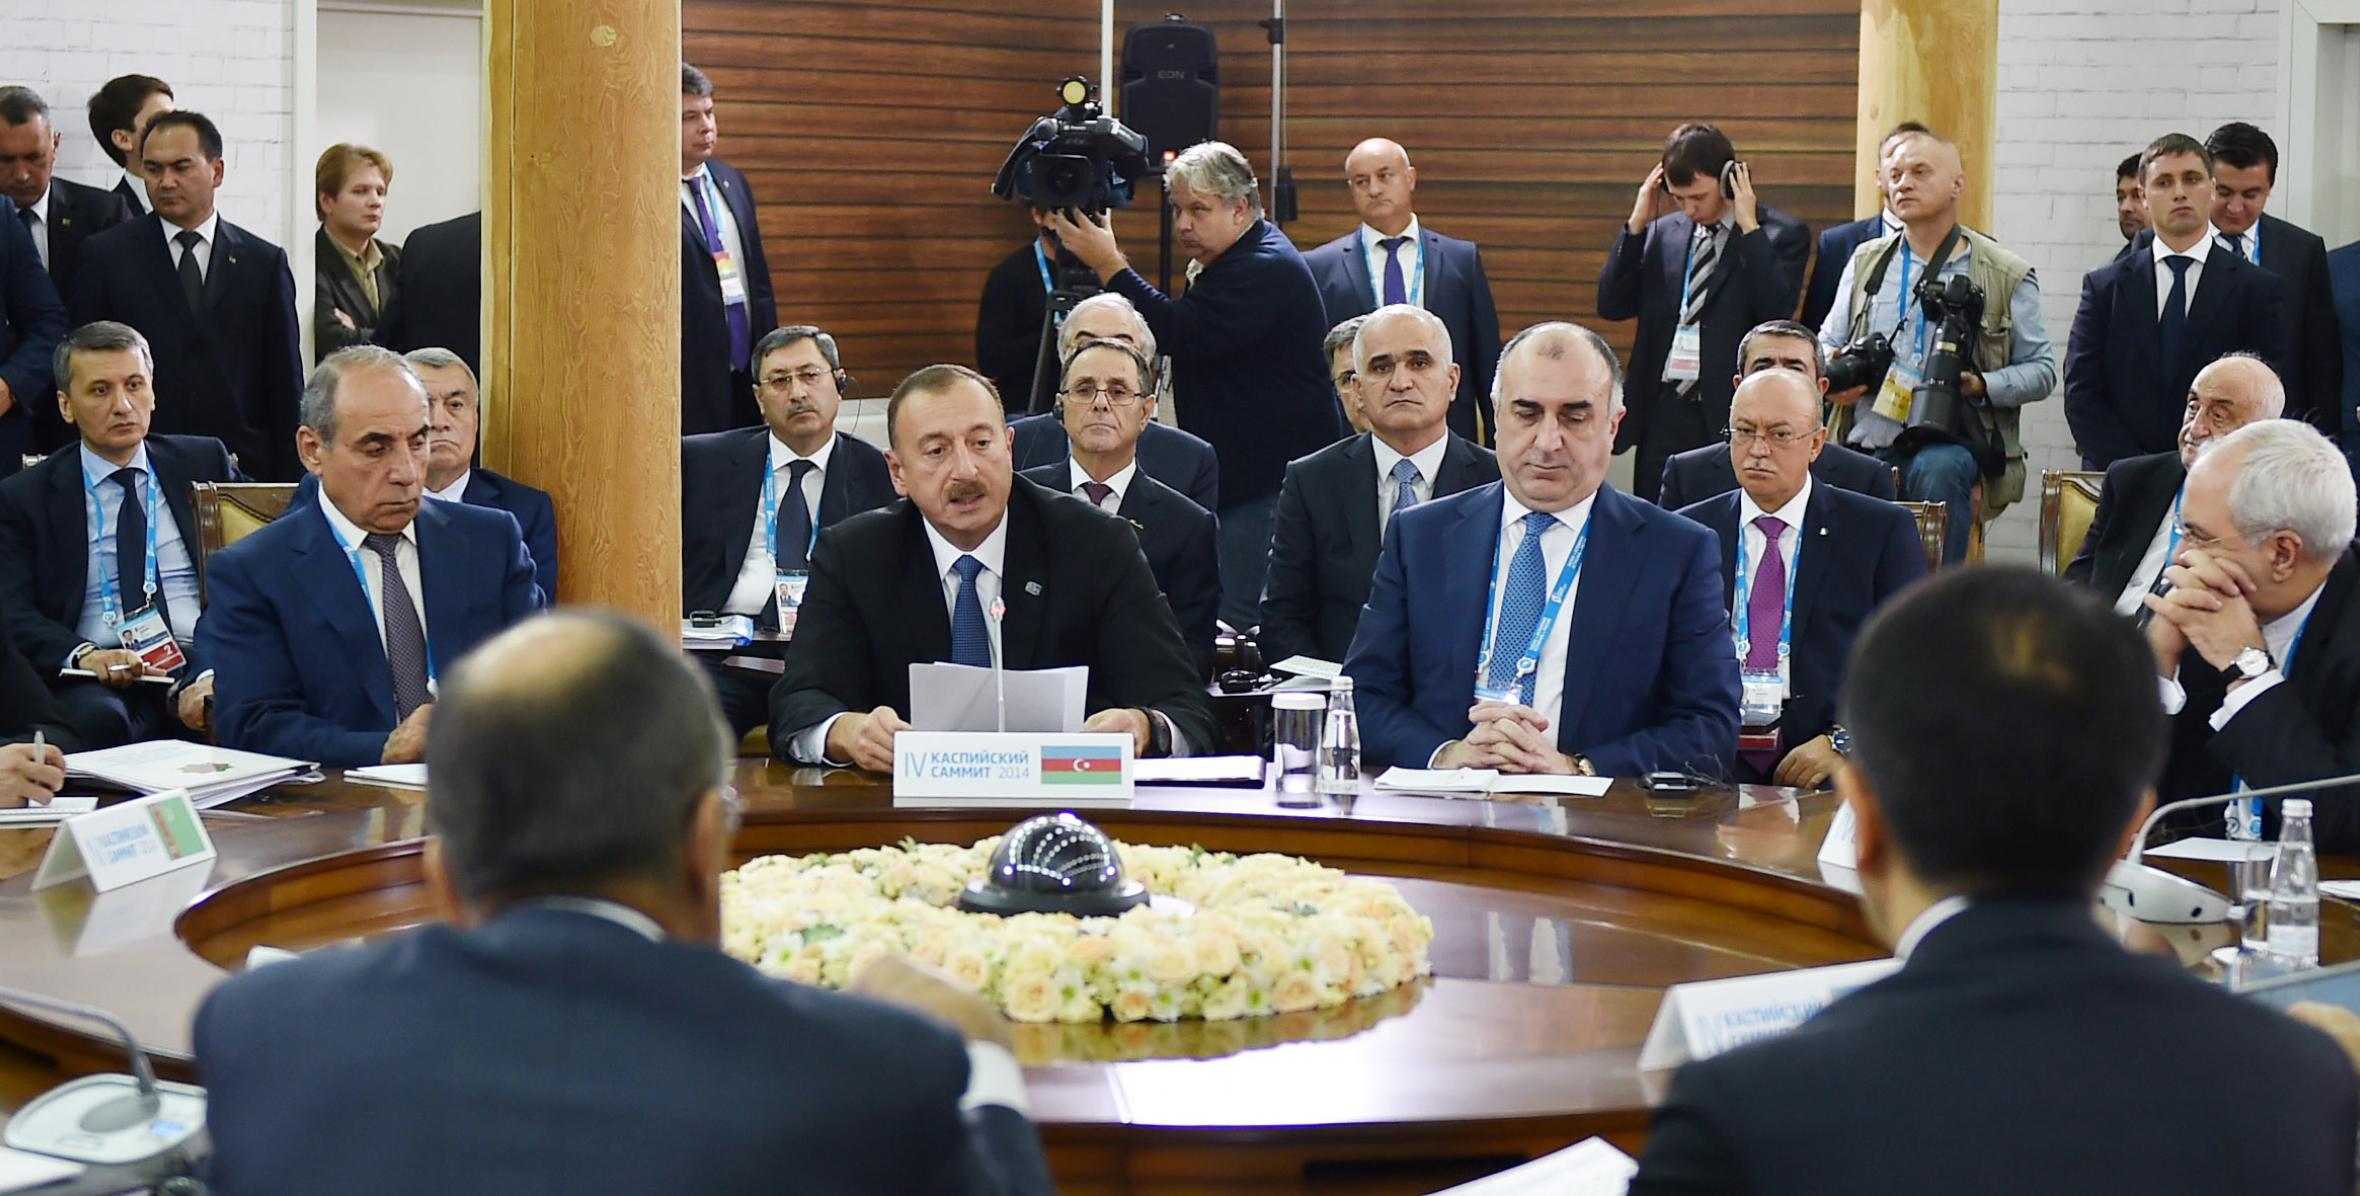 Speech by Ilham Aliyev at the 4th summit of the heads of state of Caspian littoral states